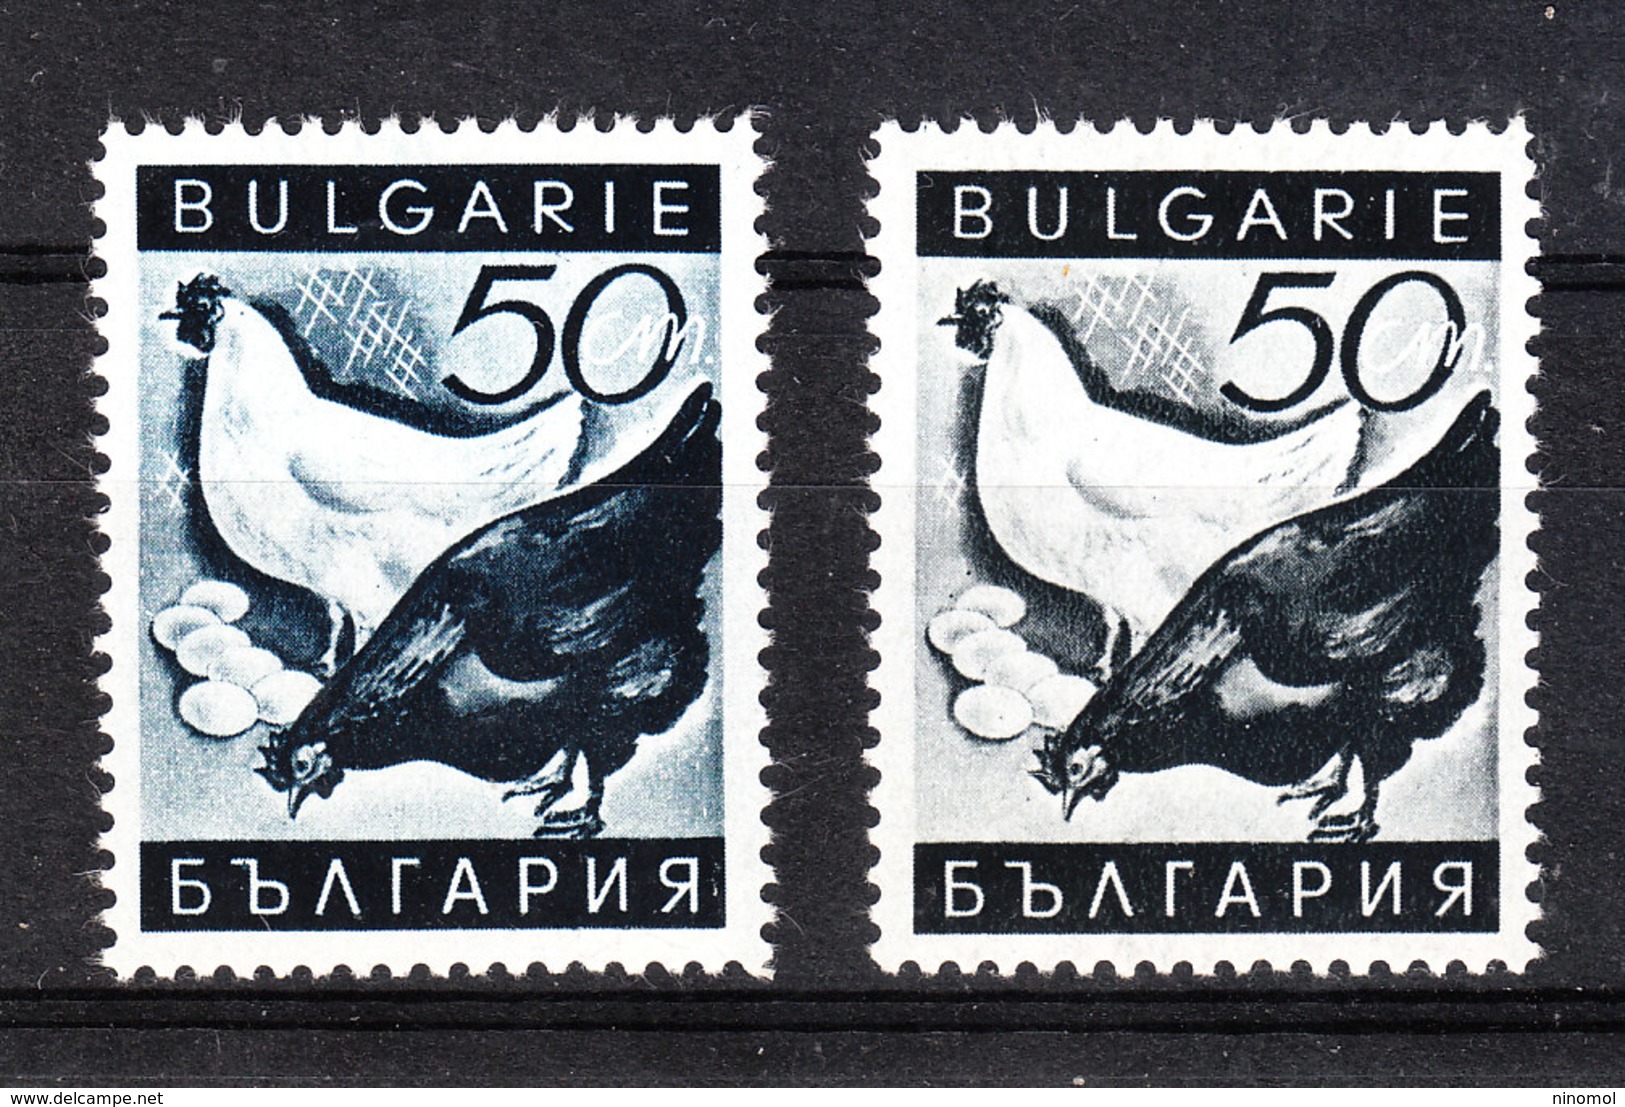 Bulgaria - 1938. Galline. I 2 Soli Francobolli Della Serie" Animali ". Hens. Only 2 Stamps Of The Series "Animals".MNH - Gallináceos & Faisanes